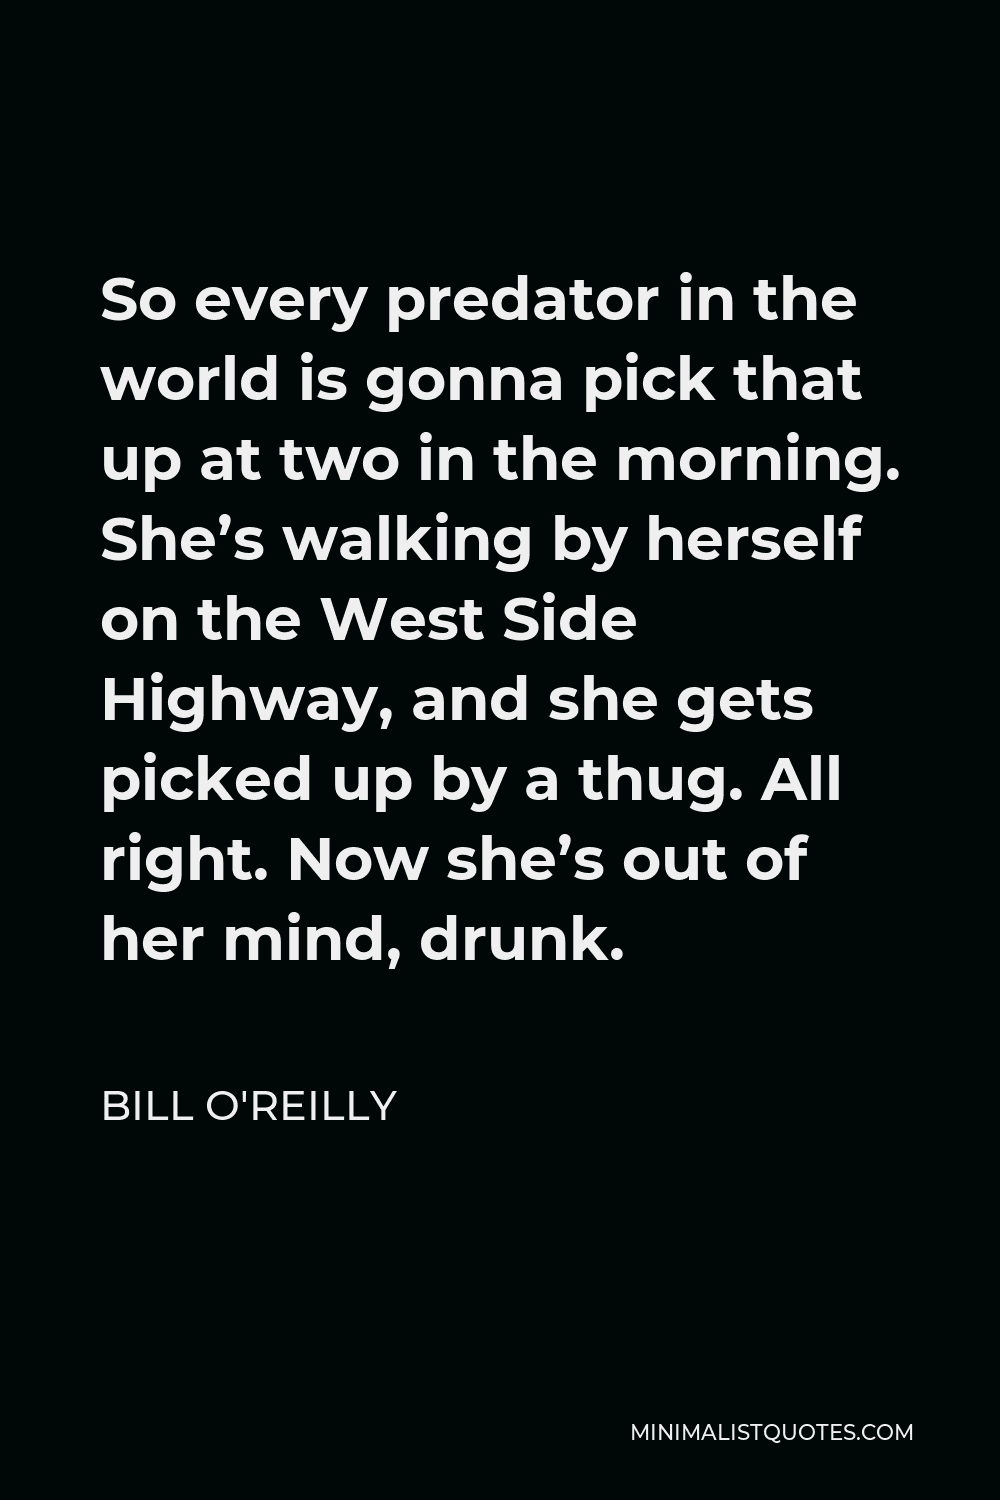 Bill O'Reilly Quote - So every predator in the world is gonna pick that up at two in the morning. She’s walking by herself on the West Side Highway, and she gets picked up by a thug. All right. Now she’s out of her mind, drunk.